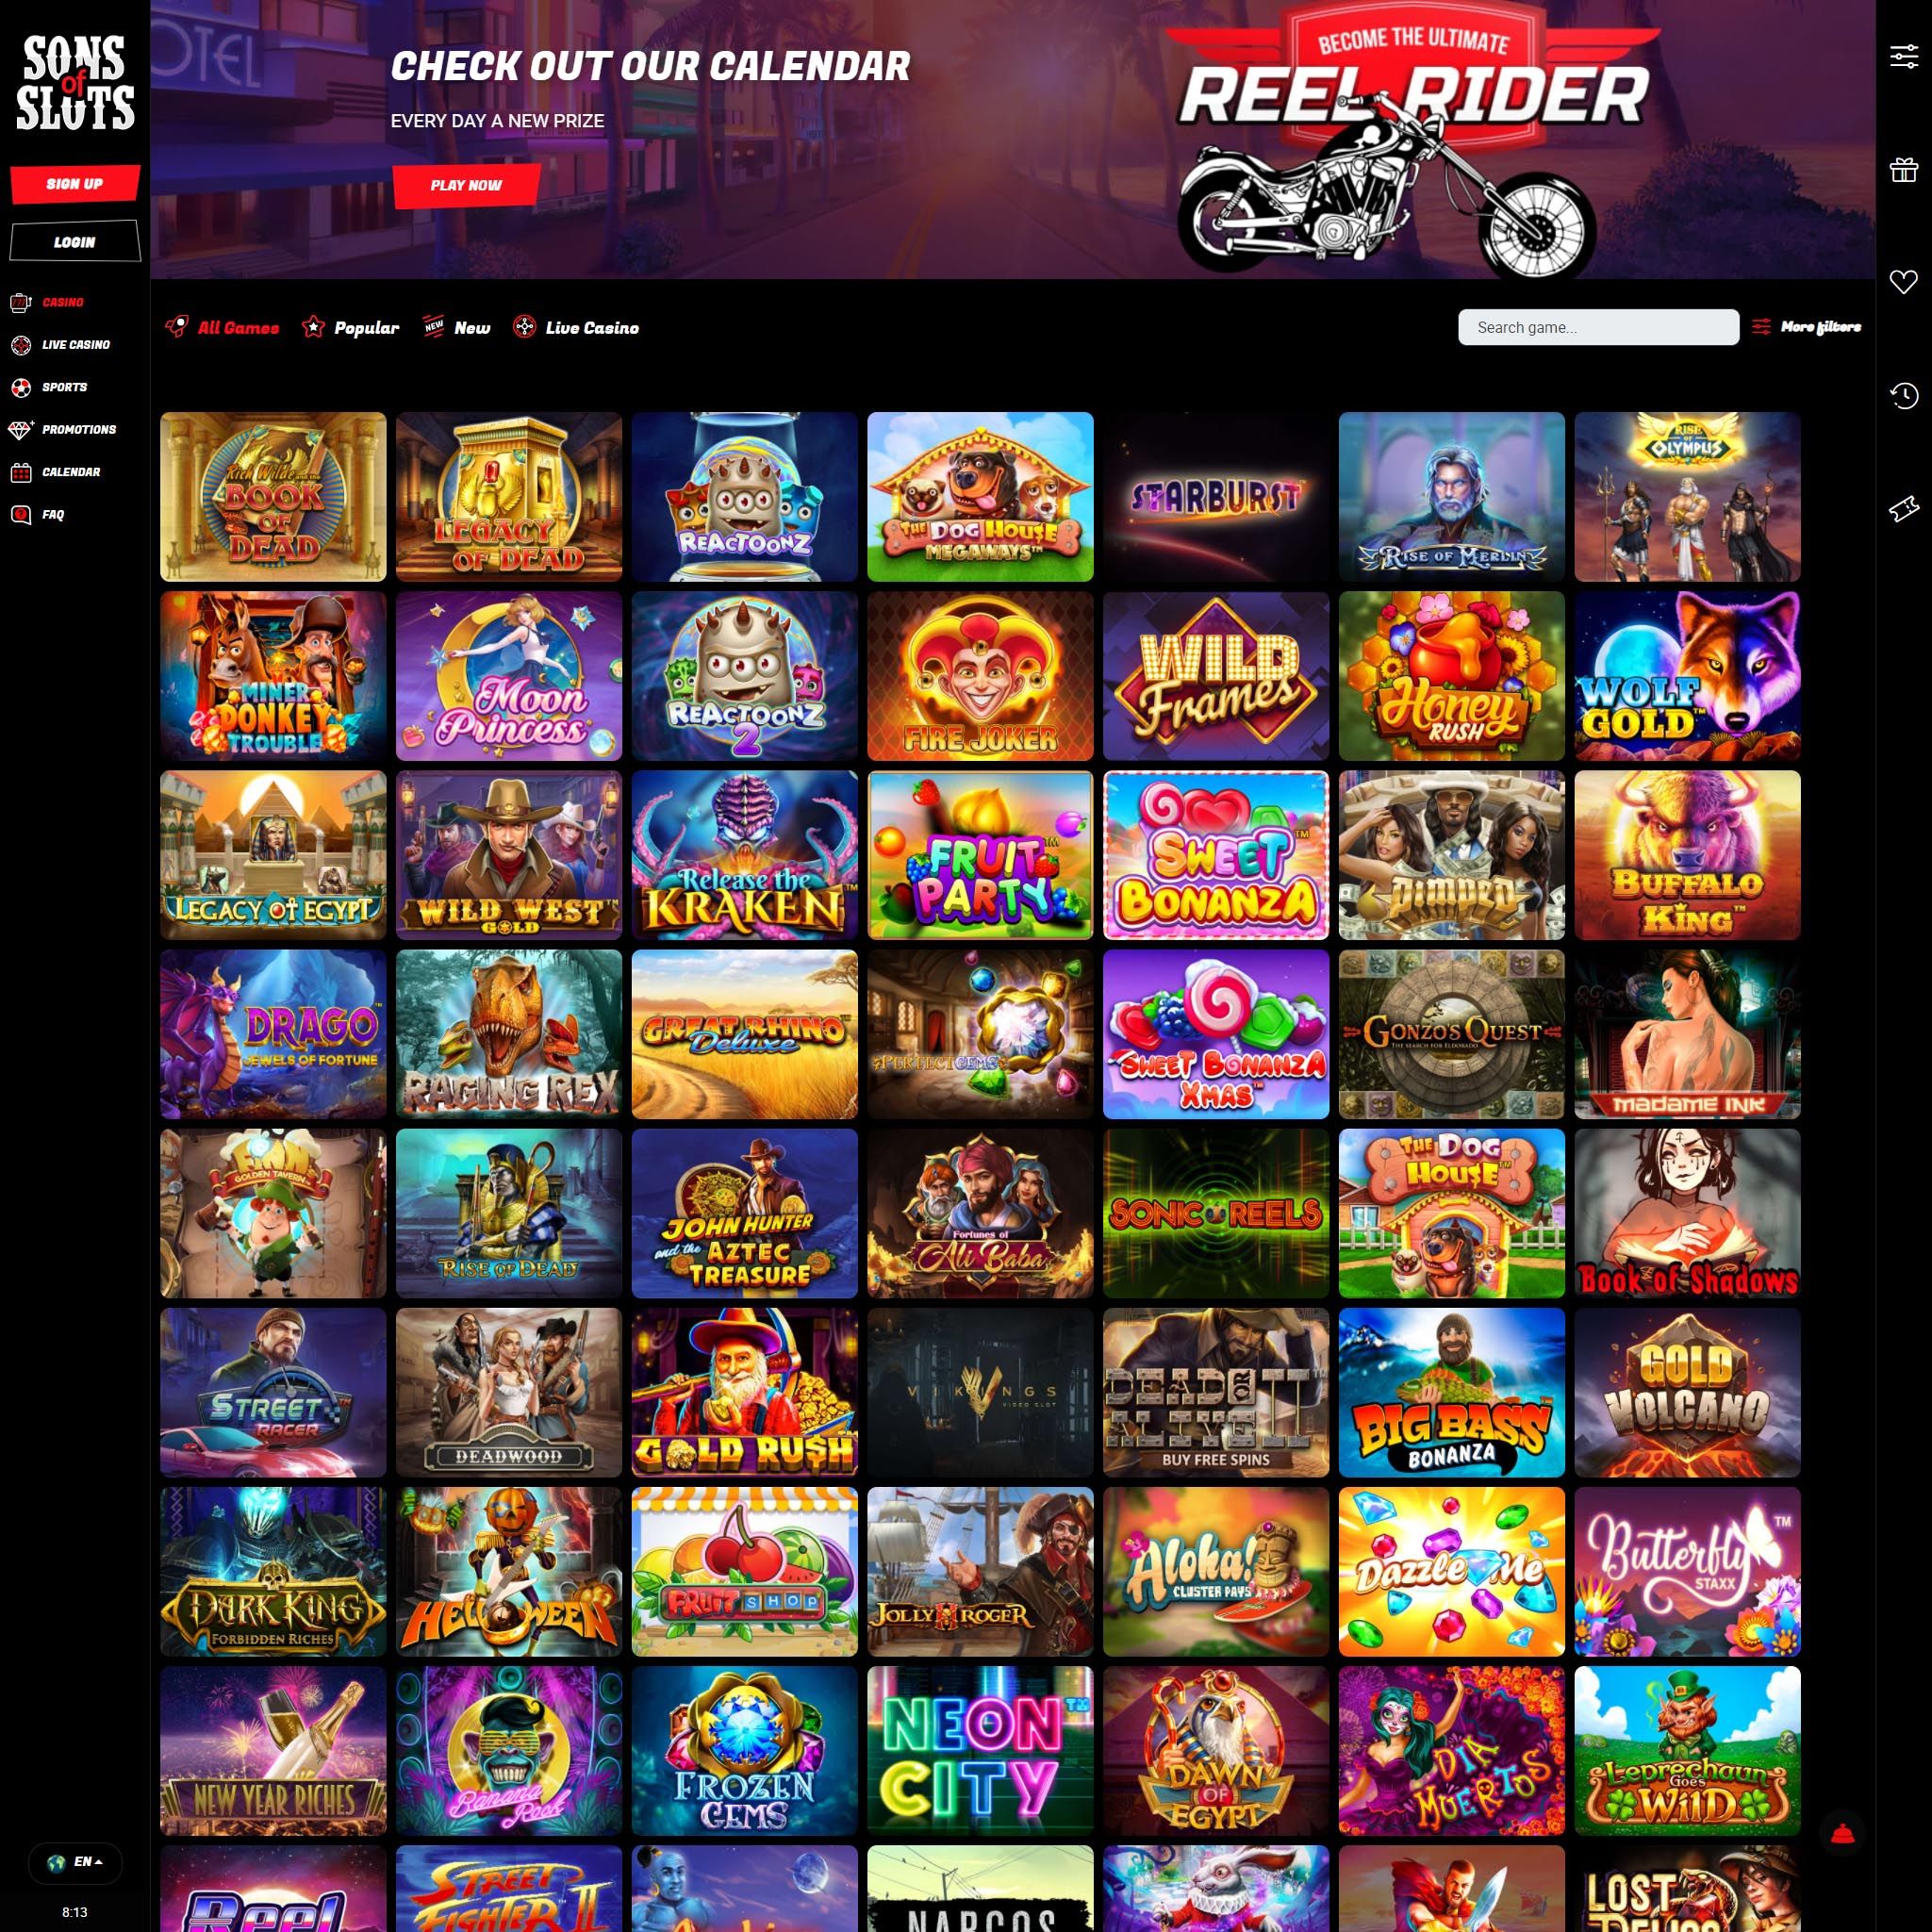 Sons of Slots Casino game catalogue